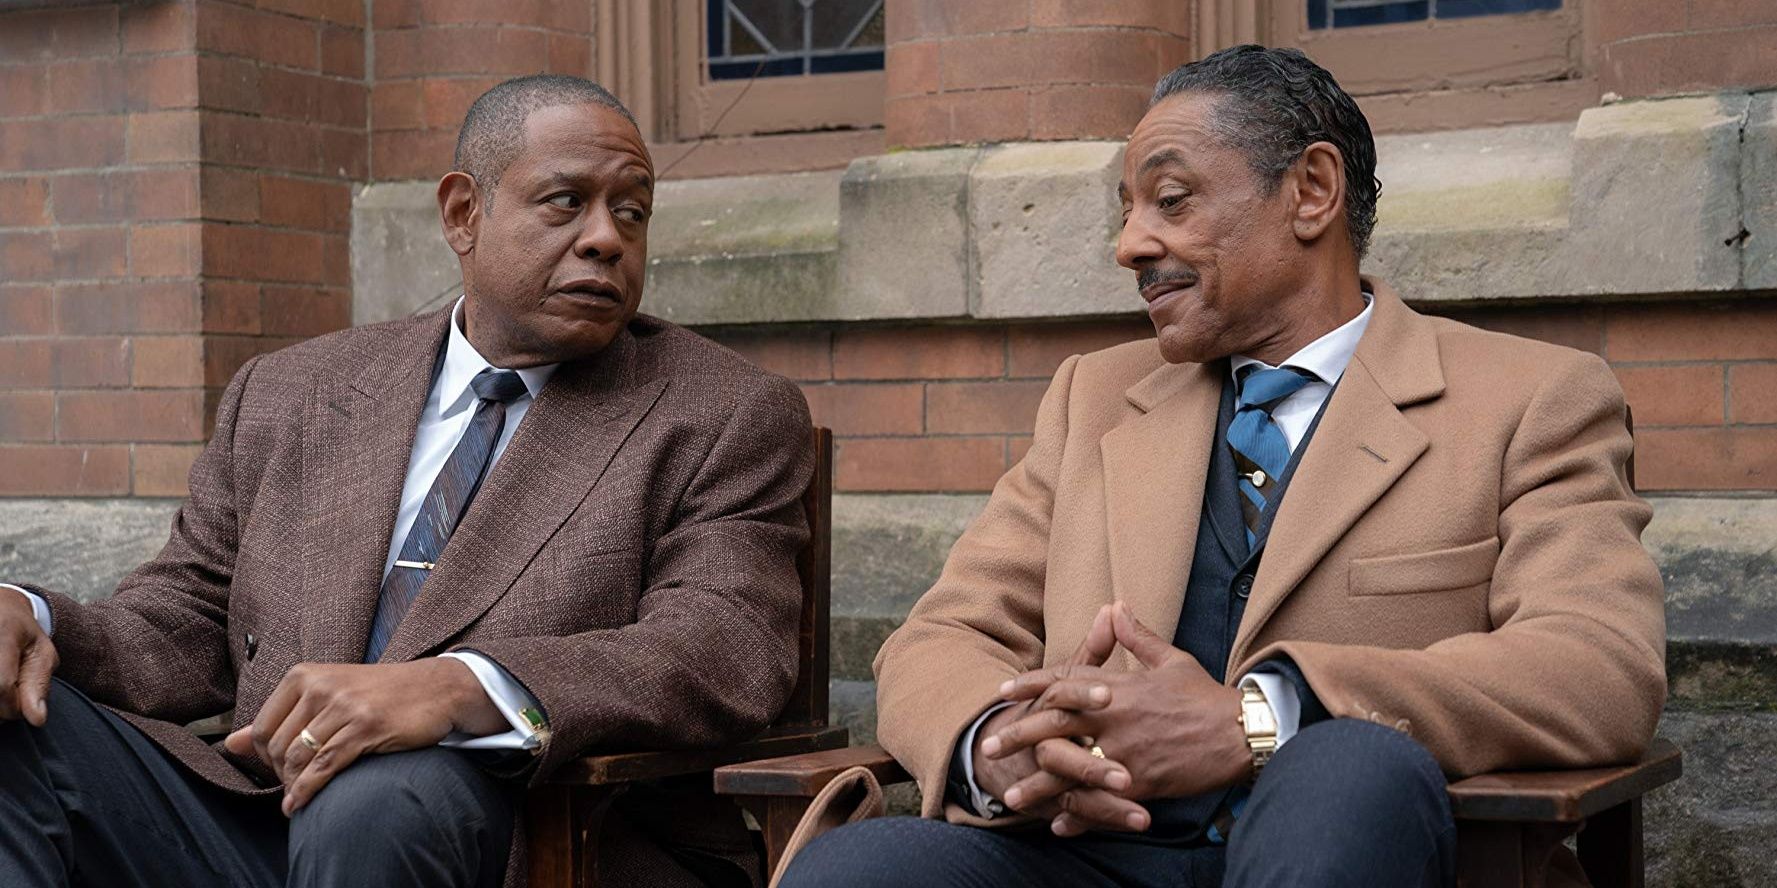 Bumpy and Congressman Powel discuss the Civil Rights movement in Godfather Of Harlem